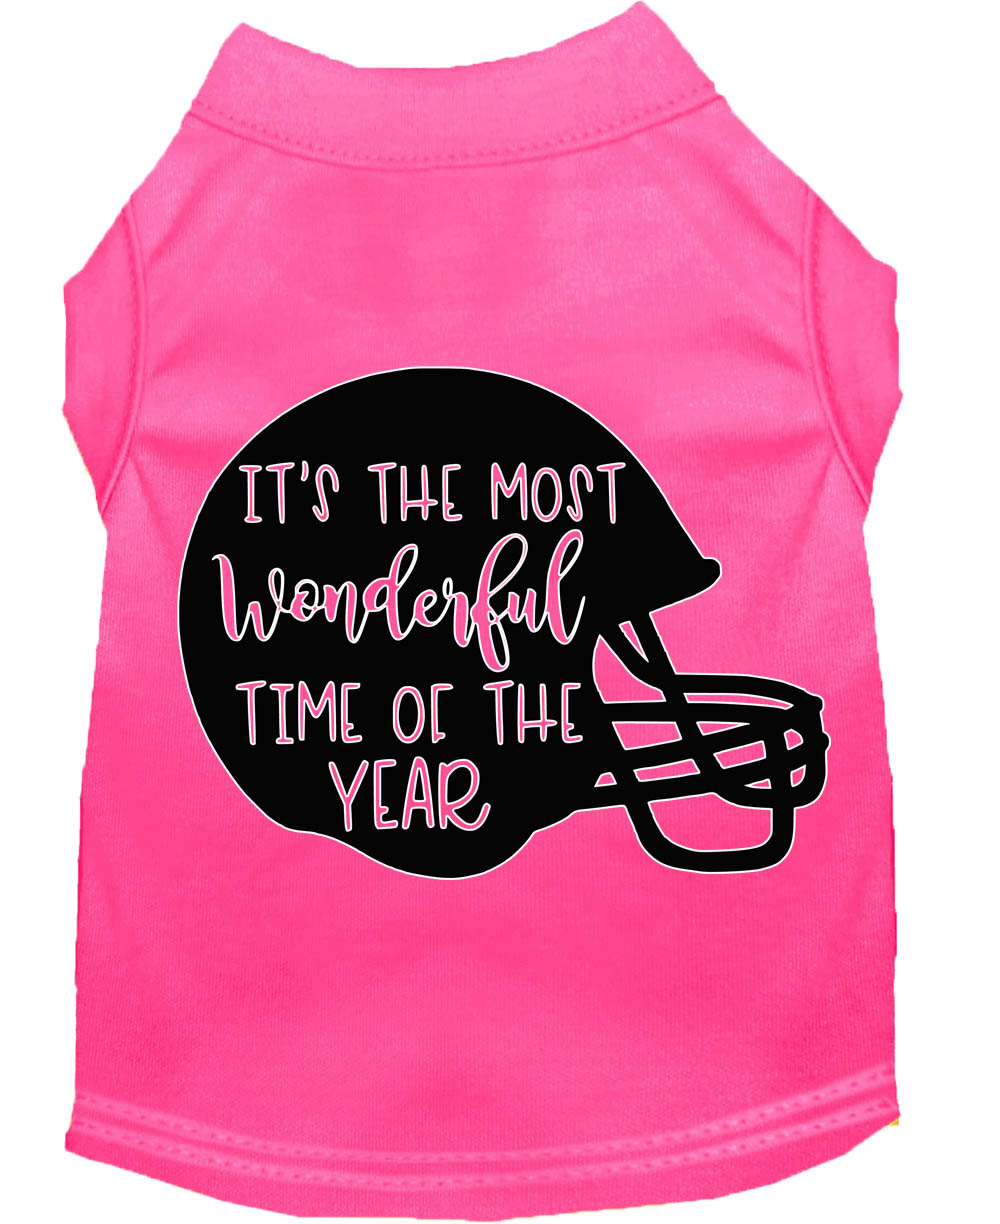 Most Wonderful Time of the Year (Football) Screen Print Dog Shirt Bright Pink Lg